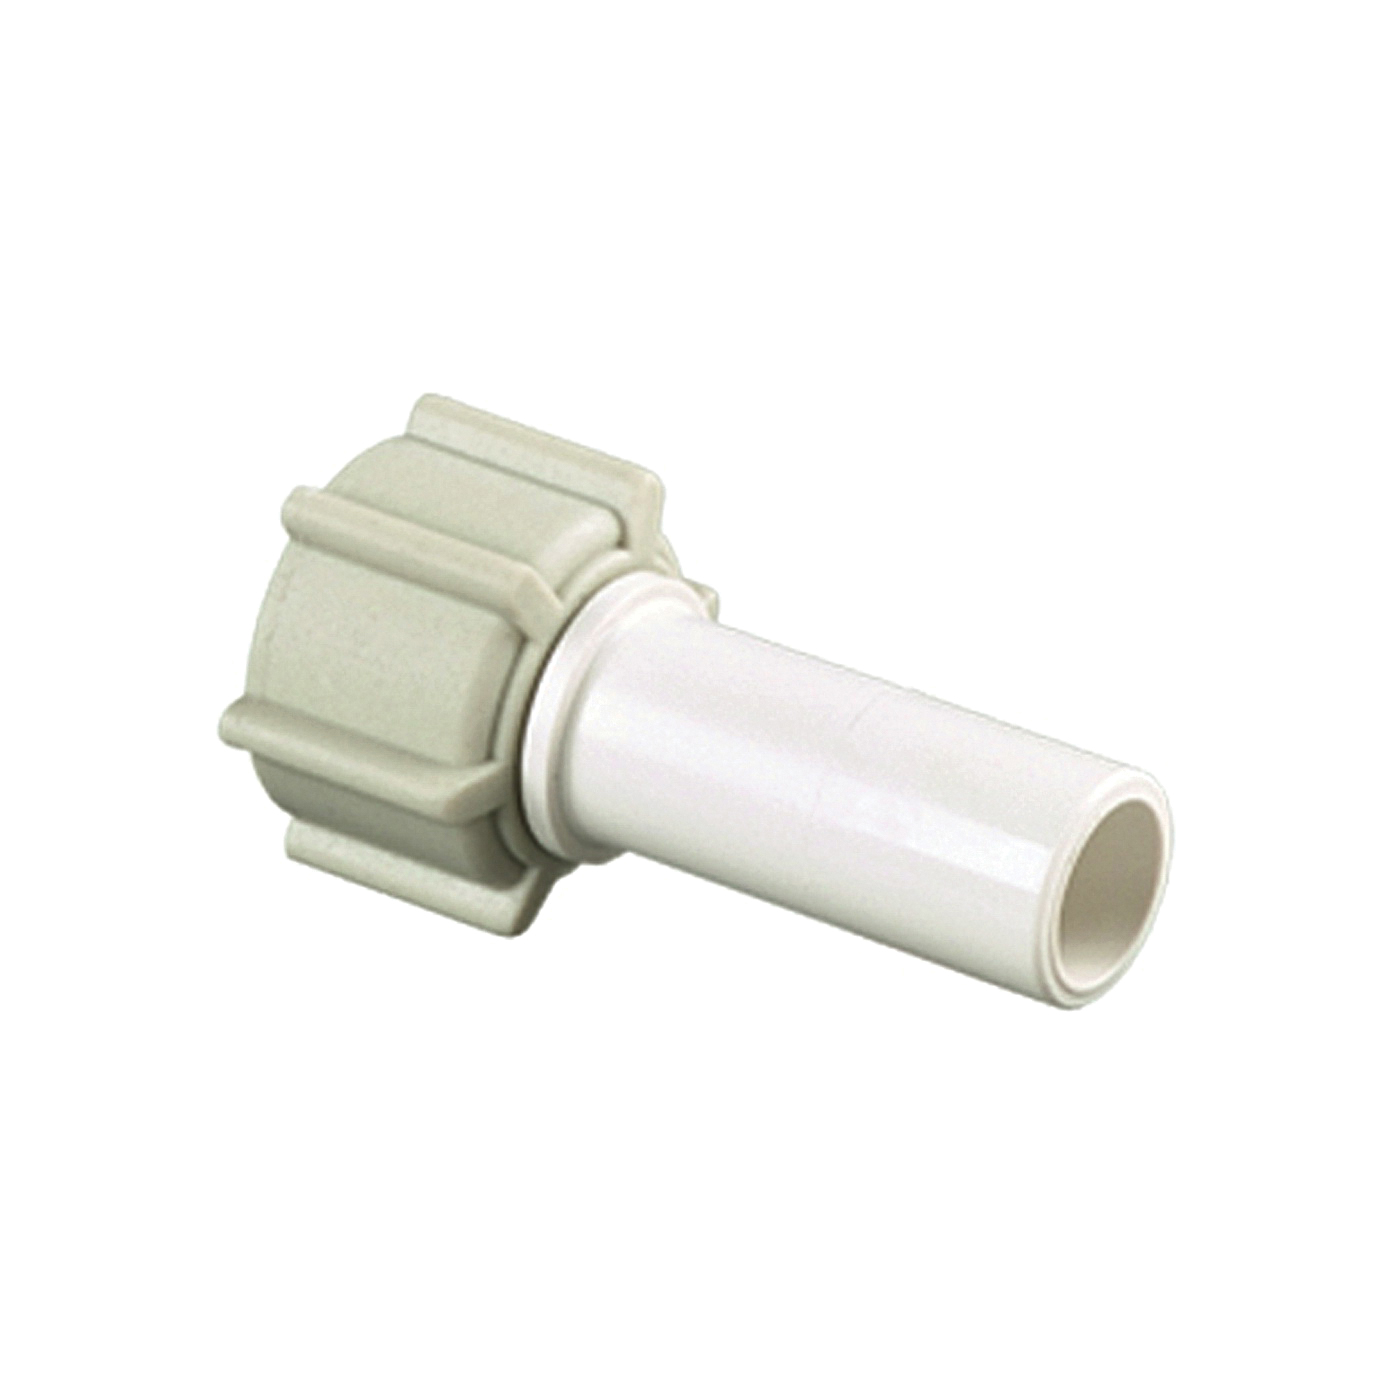 35 Series 3528-1008 Stem Connector, 1/2 in, CTS x FPT, Polysulfide, 250 psi Pressure, Off-White